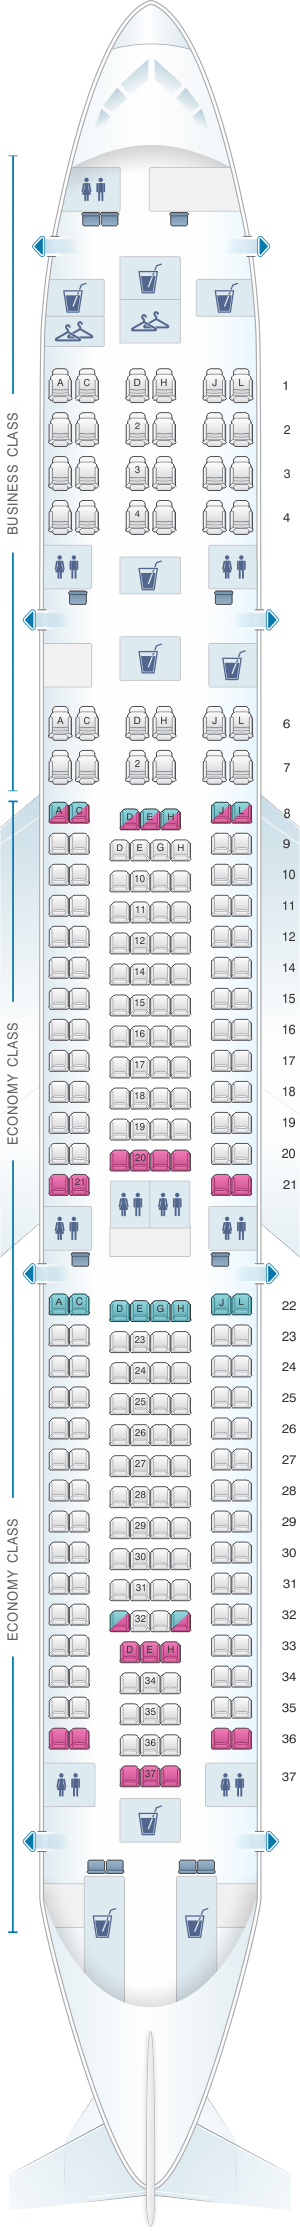 Seat map for Philippine Airlines Airbus A340 300 254pax